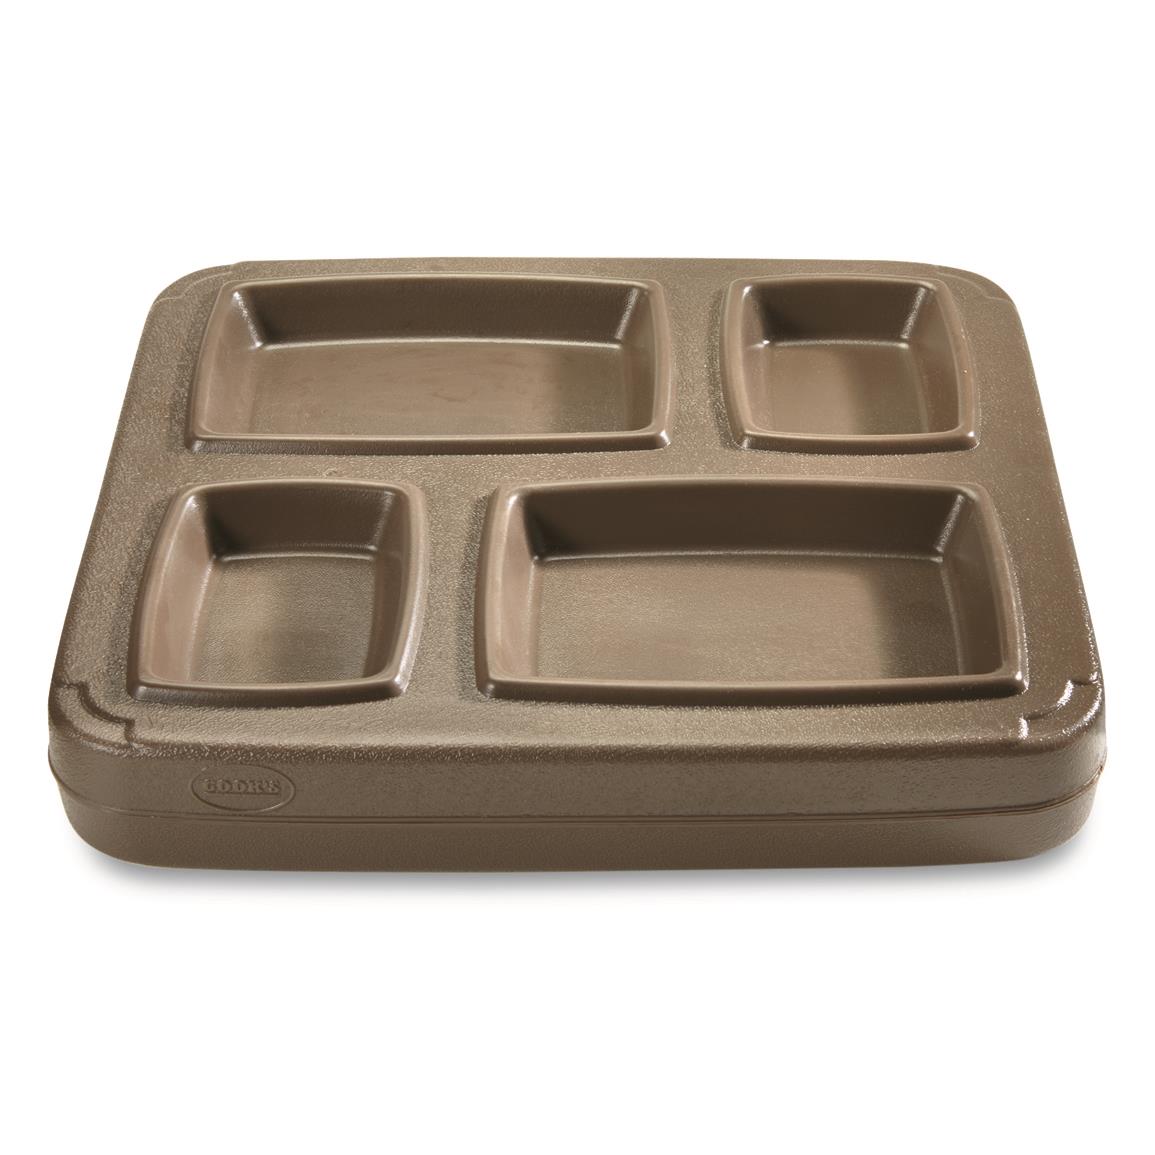 U.S. Military Surplus Gator Insulated Meal Tray, New